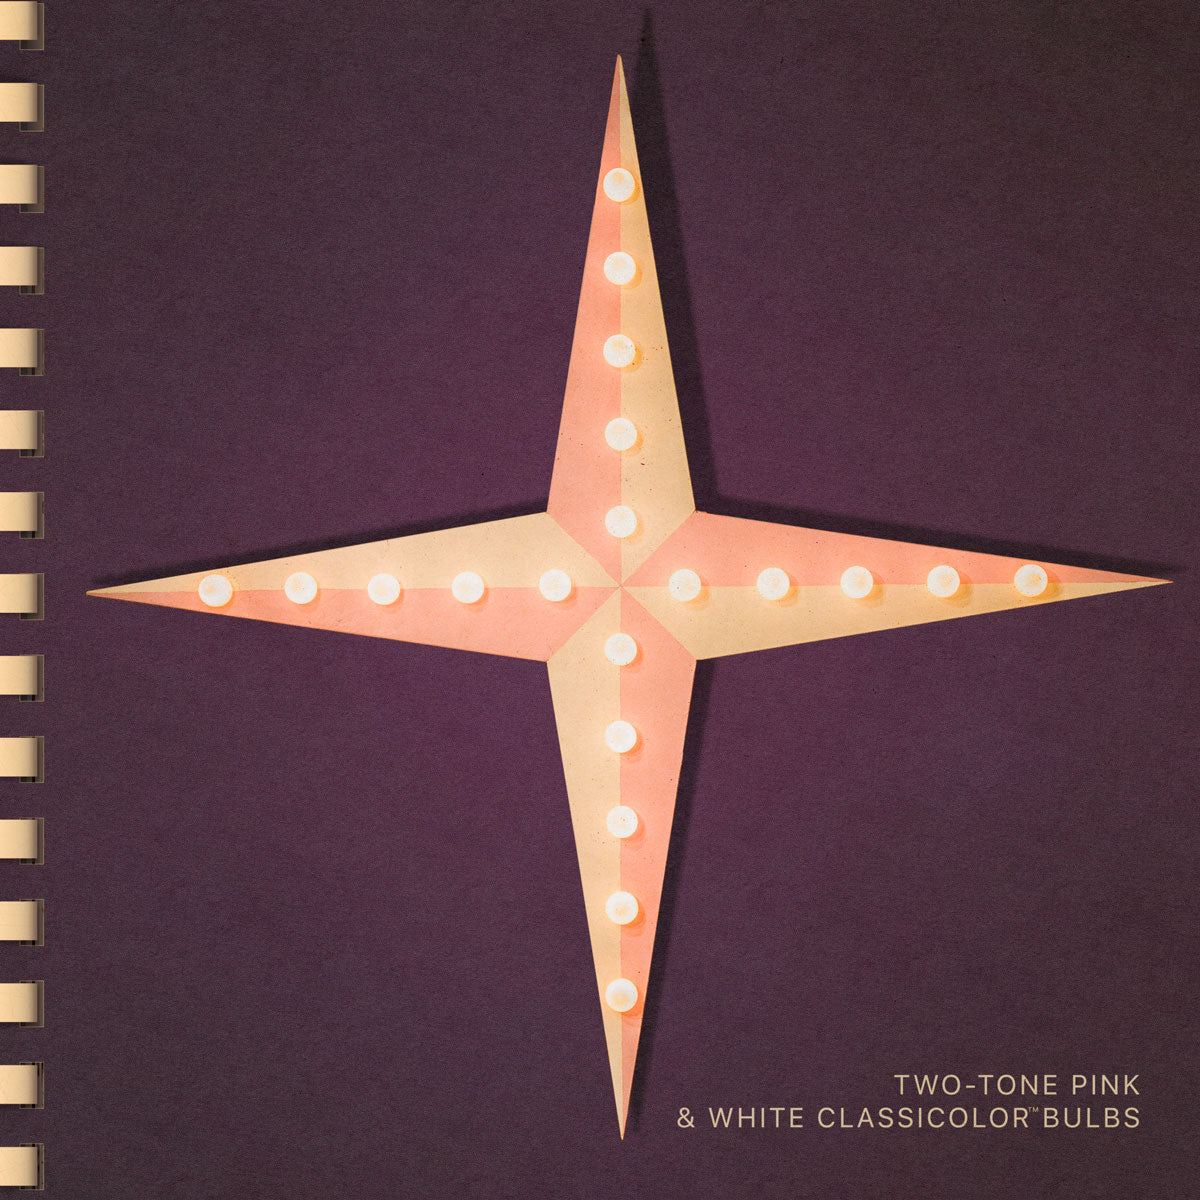 4-point star with pink and white lights